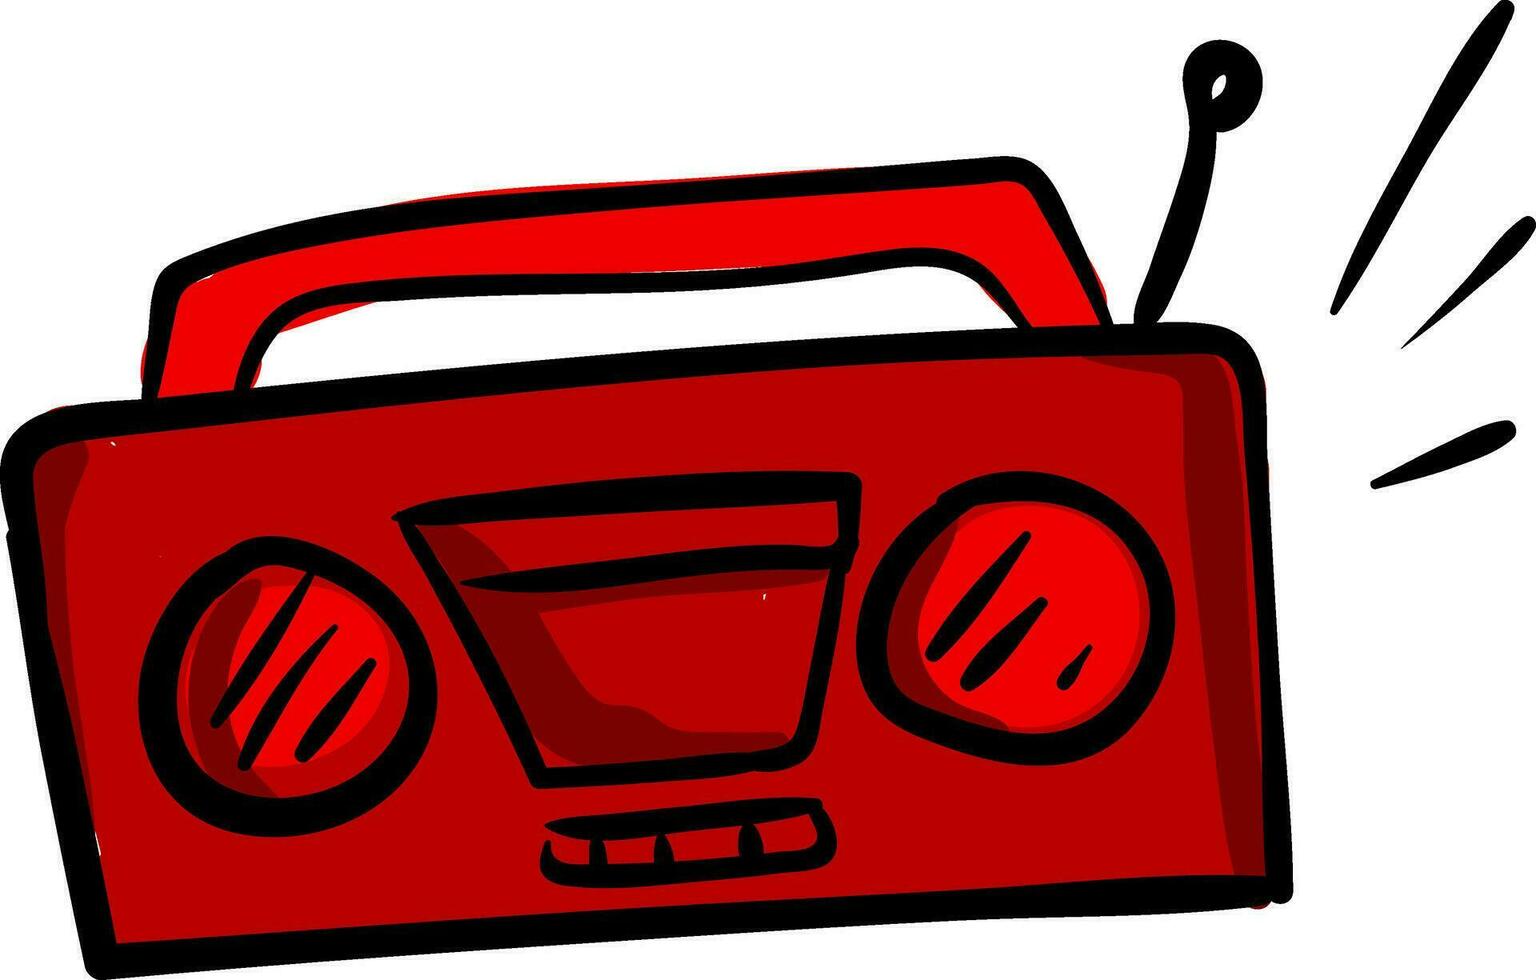 Clipart of the red radio cassette player old model set isolated on white background, vector or color illustration